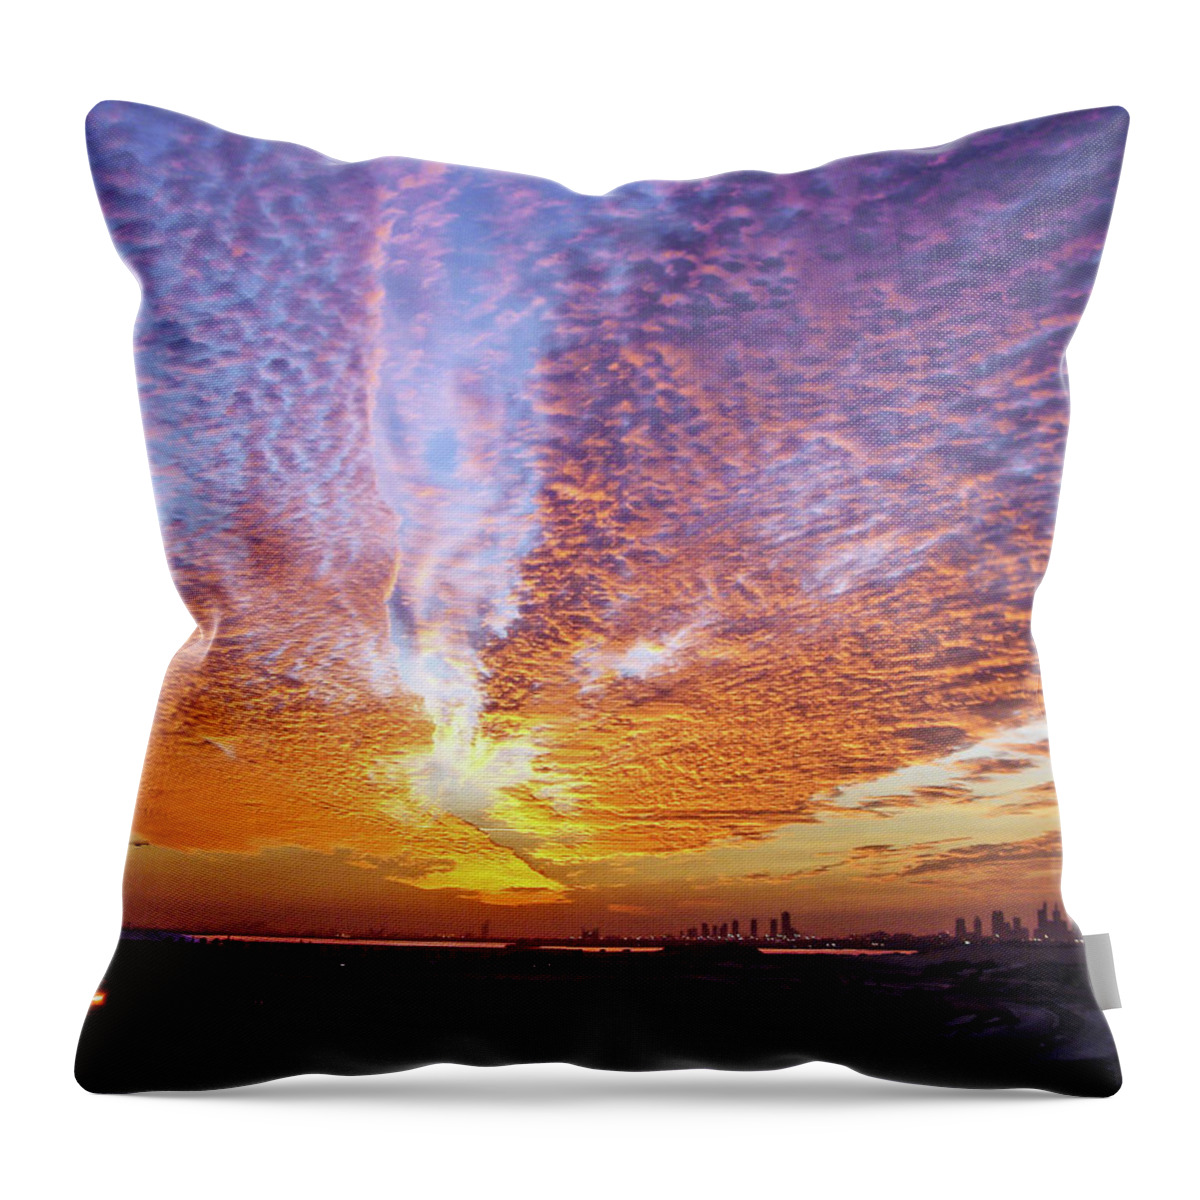 Sunset Throw Pillow featuring the photograph Sunset Colors by Peggy Blackwell